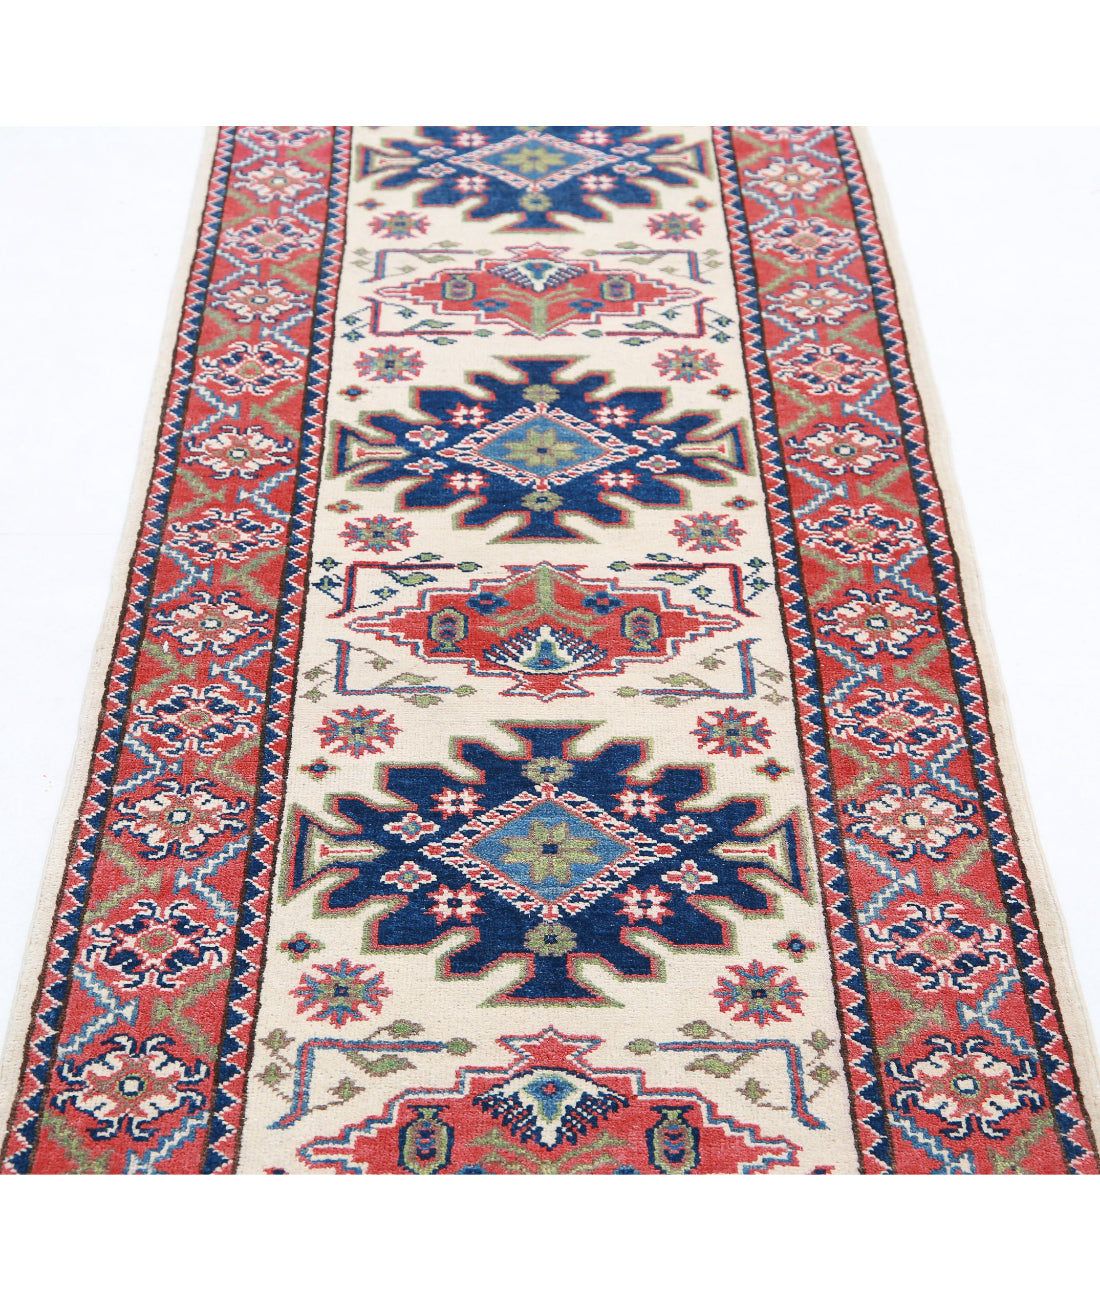 Hand Knotted Tribal Kazak Wool Rug - 2'6'' x 9'7'' 2'6'' x 9'7'' (75 X 288) / Ivory / Red